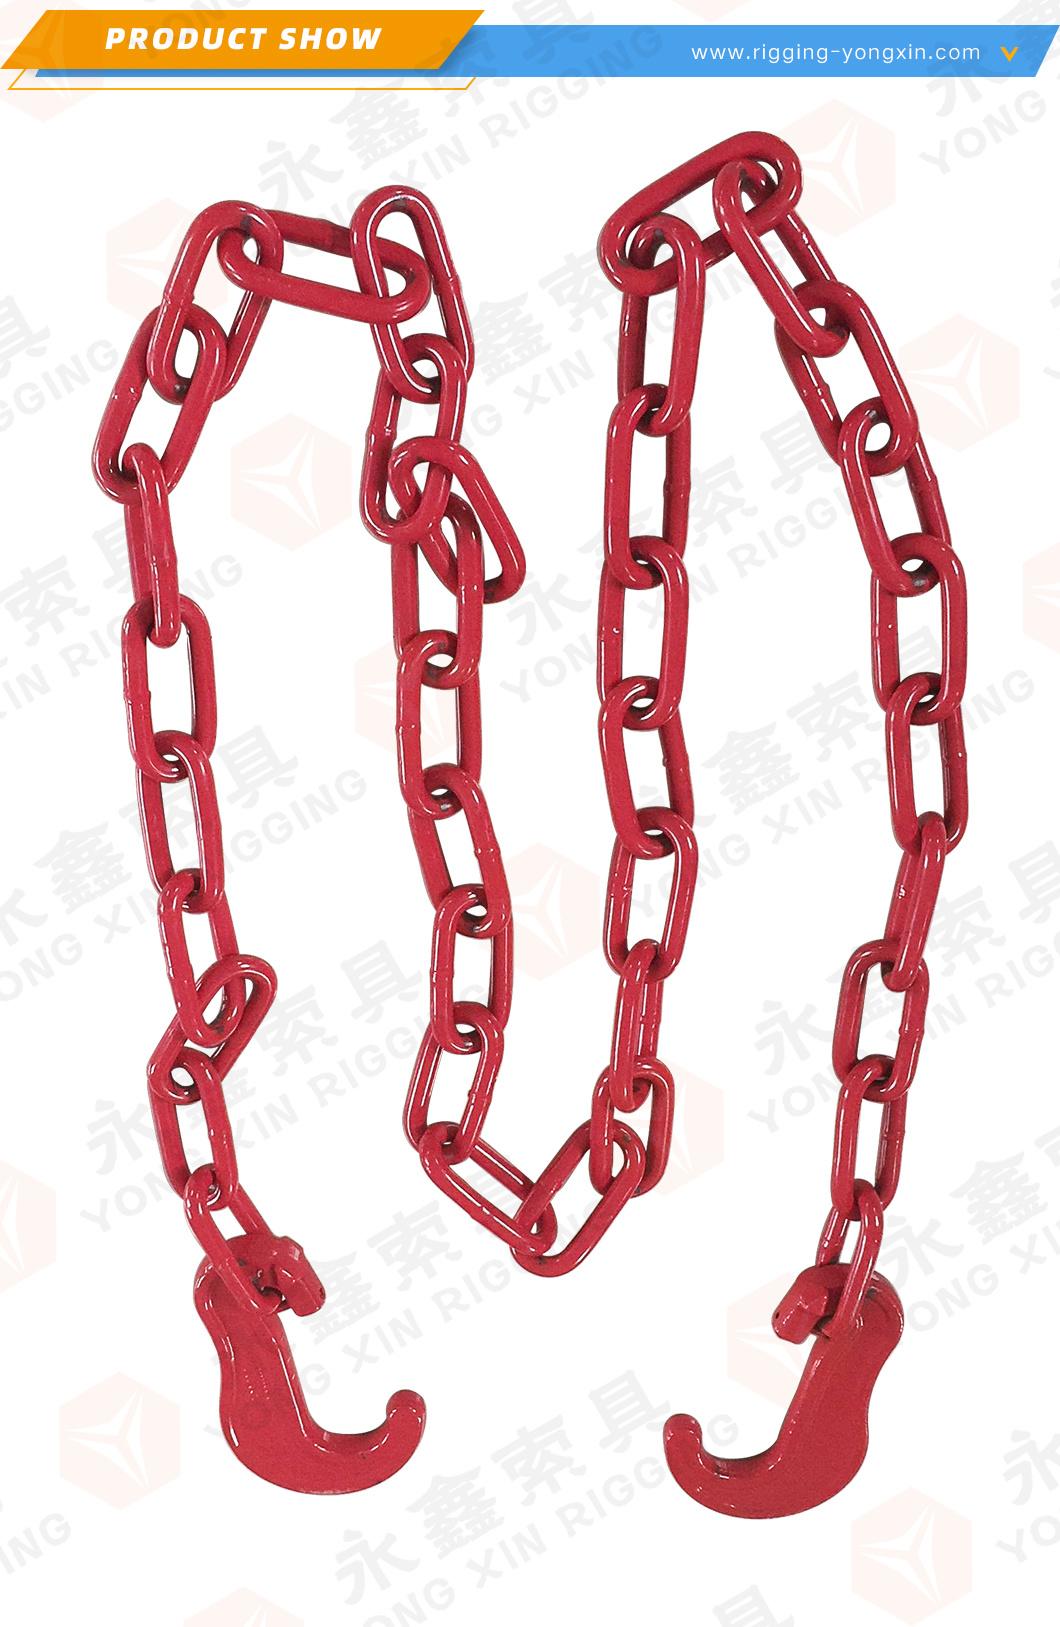 High Strength 13mm Alloy Powder Coating Lashing Chain with J/C Type Hook